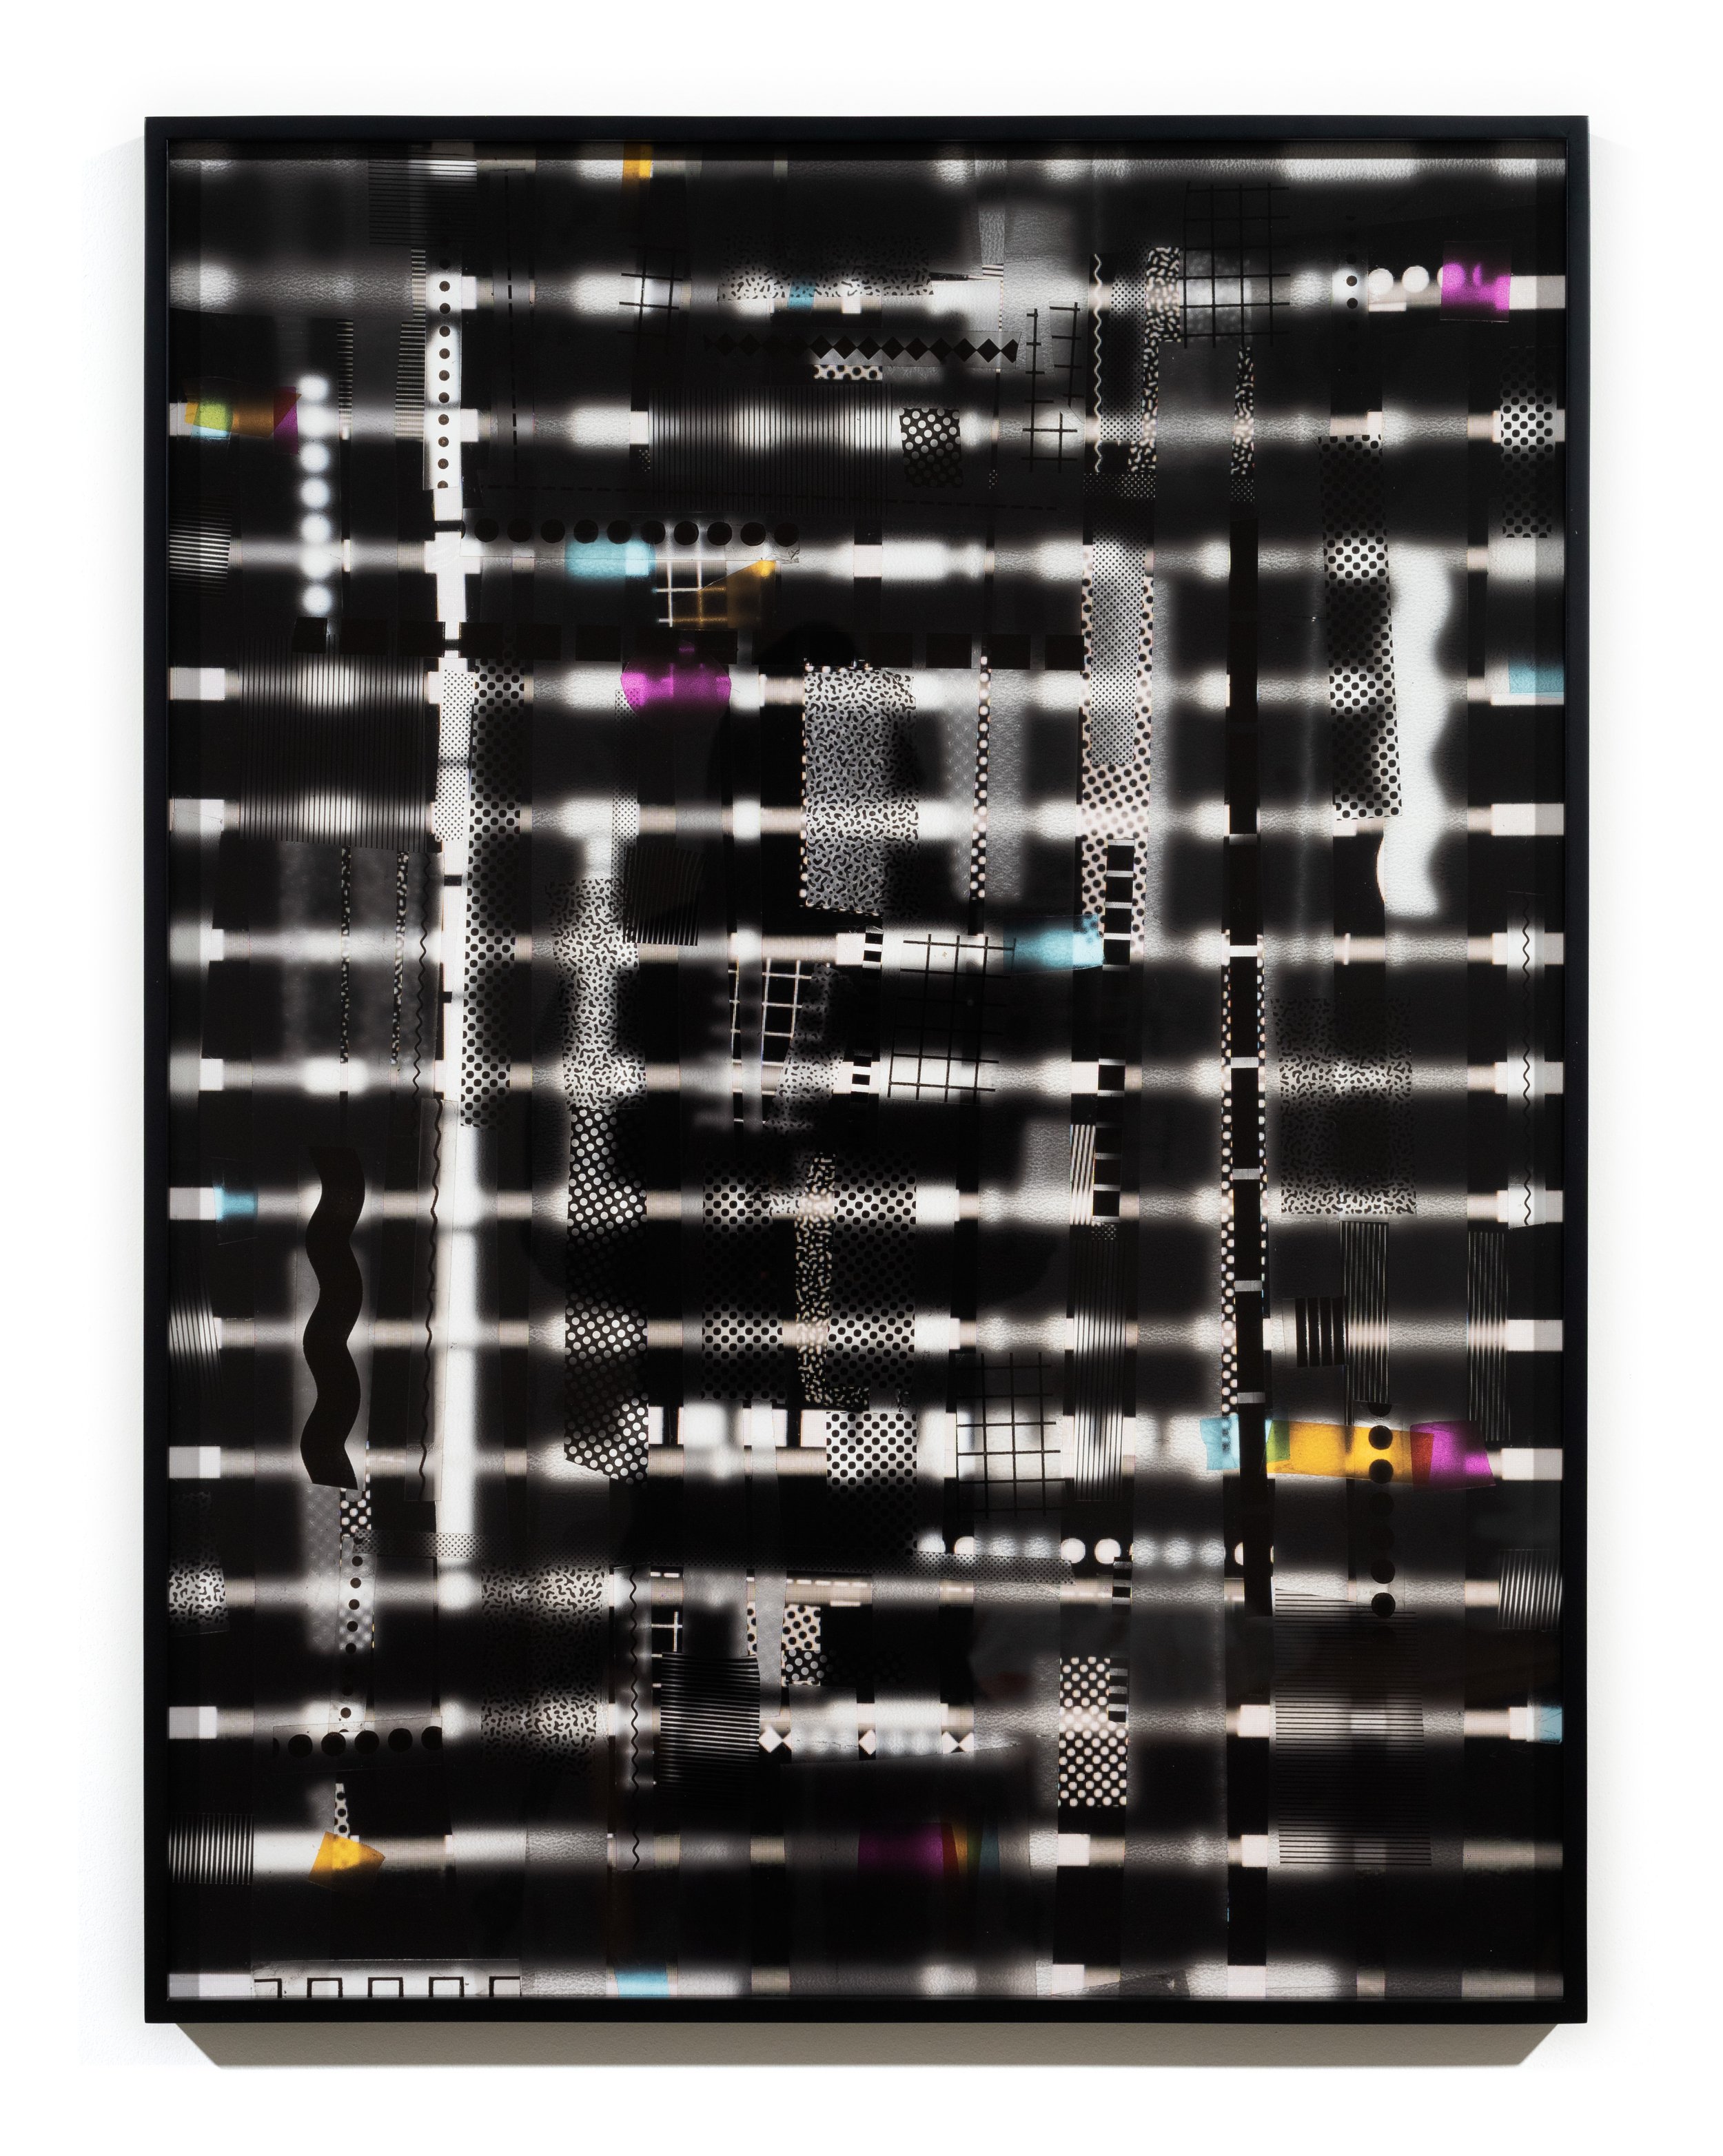   Line Rules , 2021 Archival pigment print 40 x 30 x 1 1/2 inches (framed) 